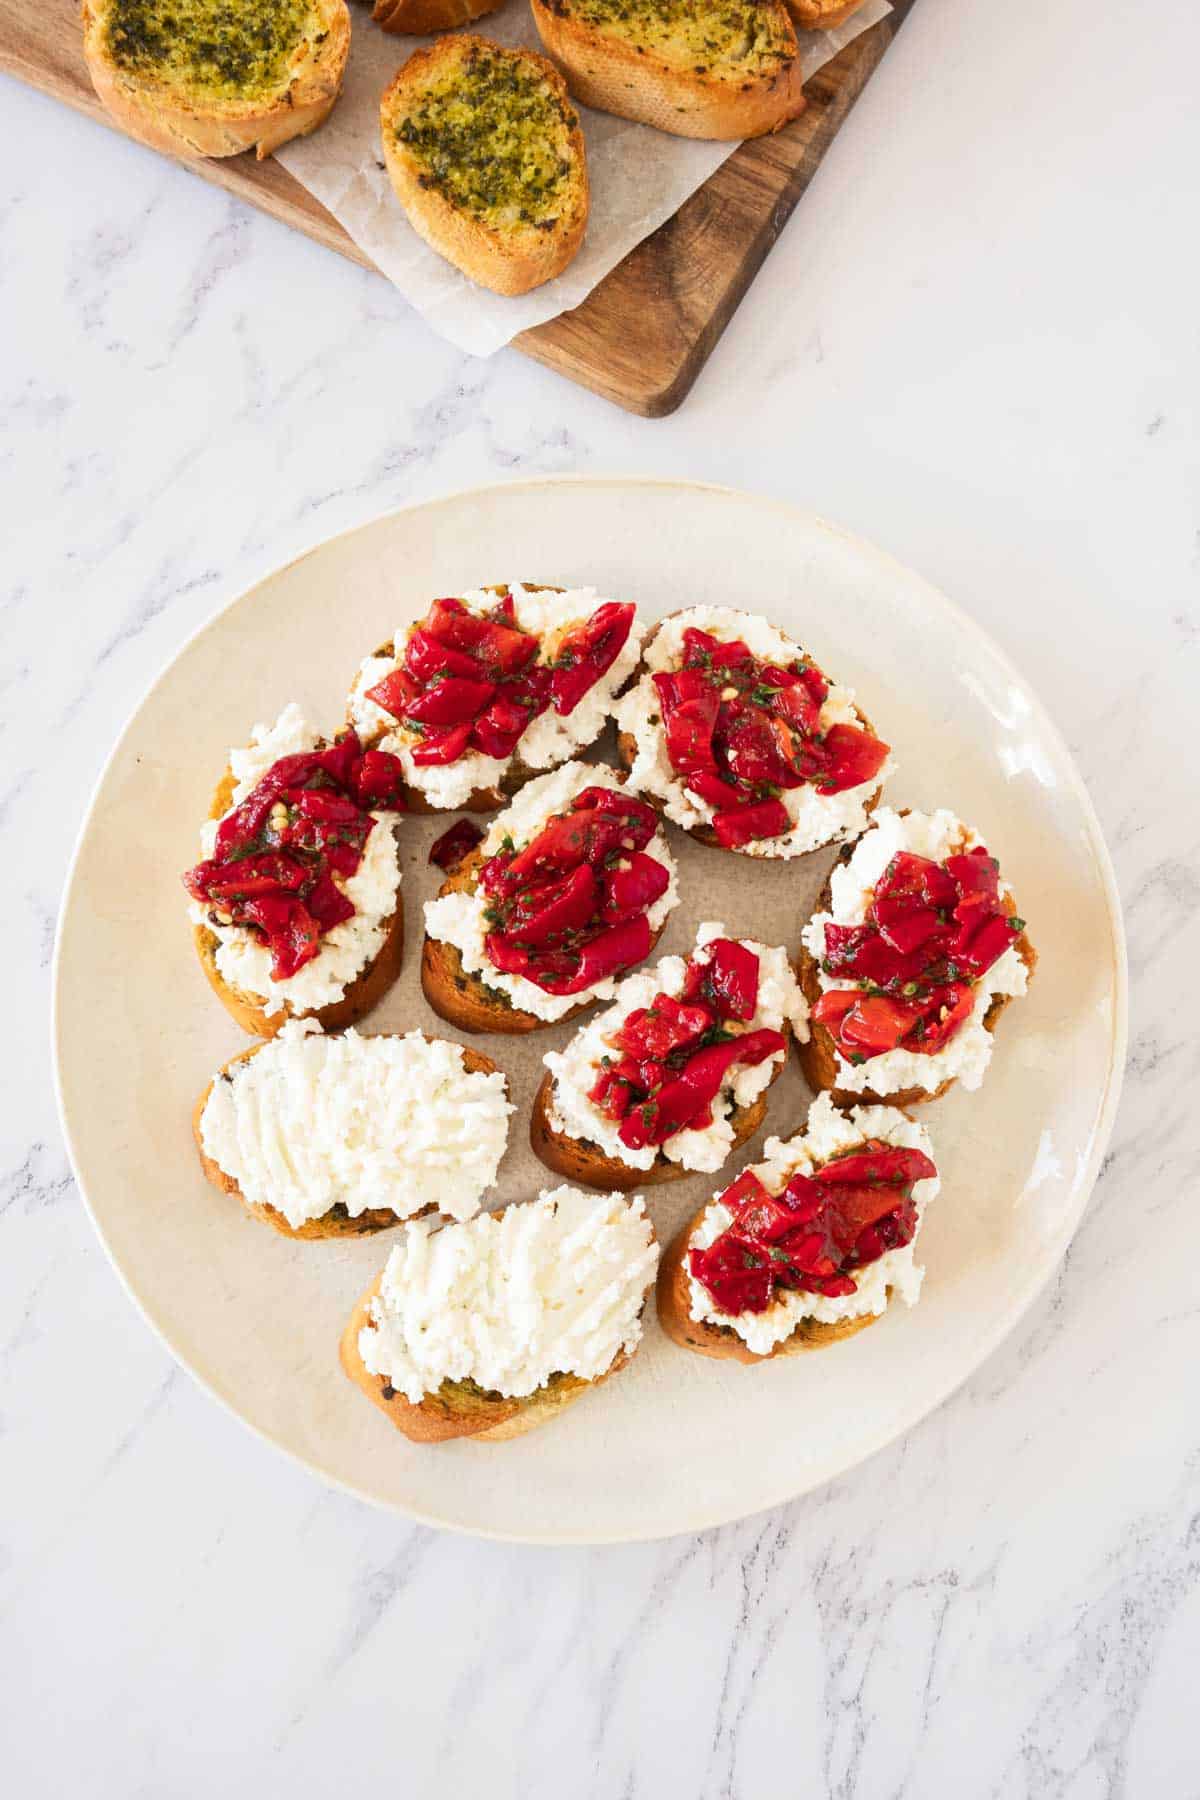 A plate of bruschetta with ricotta topped with roasted red peppers.